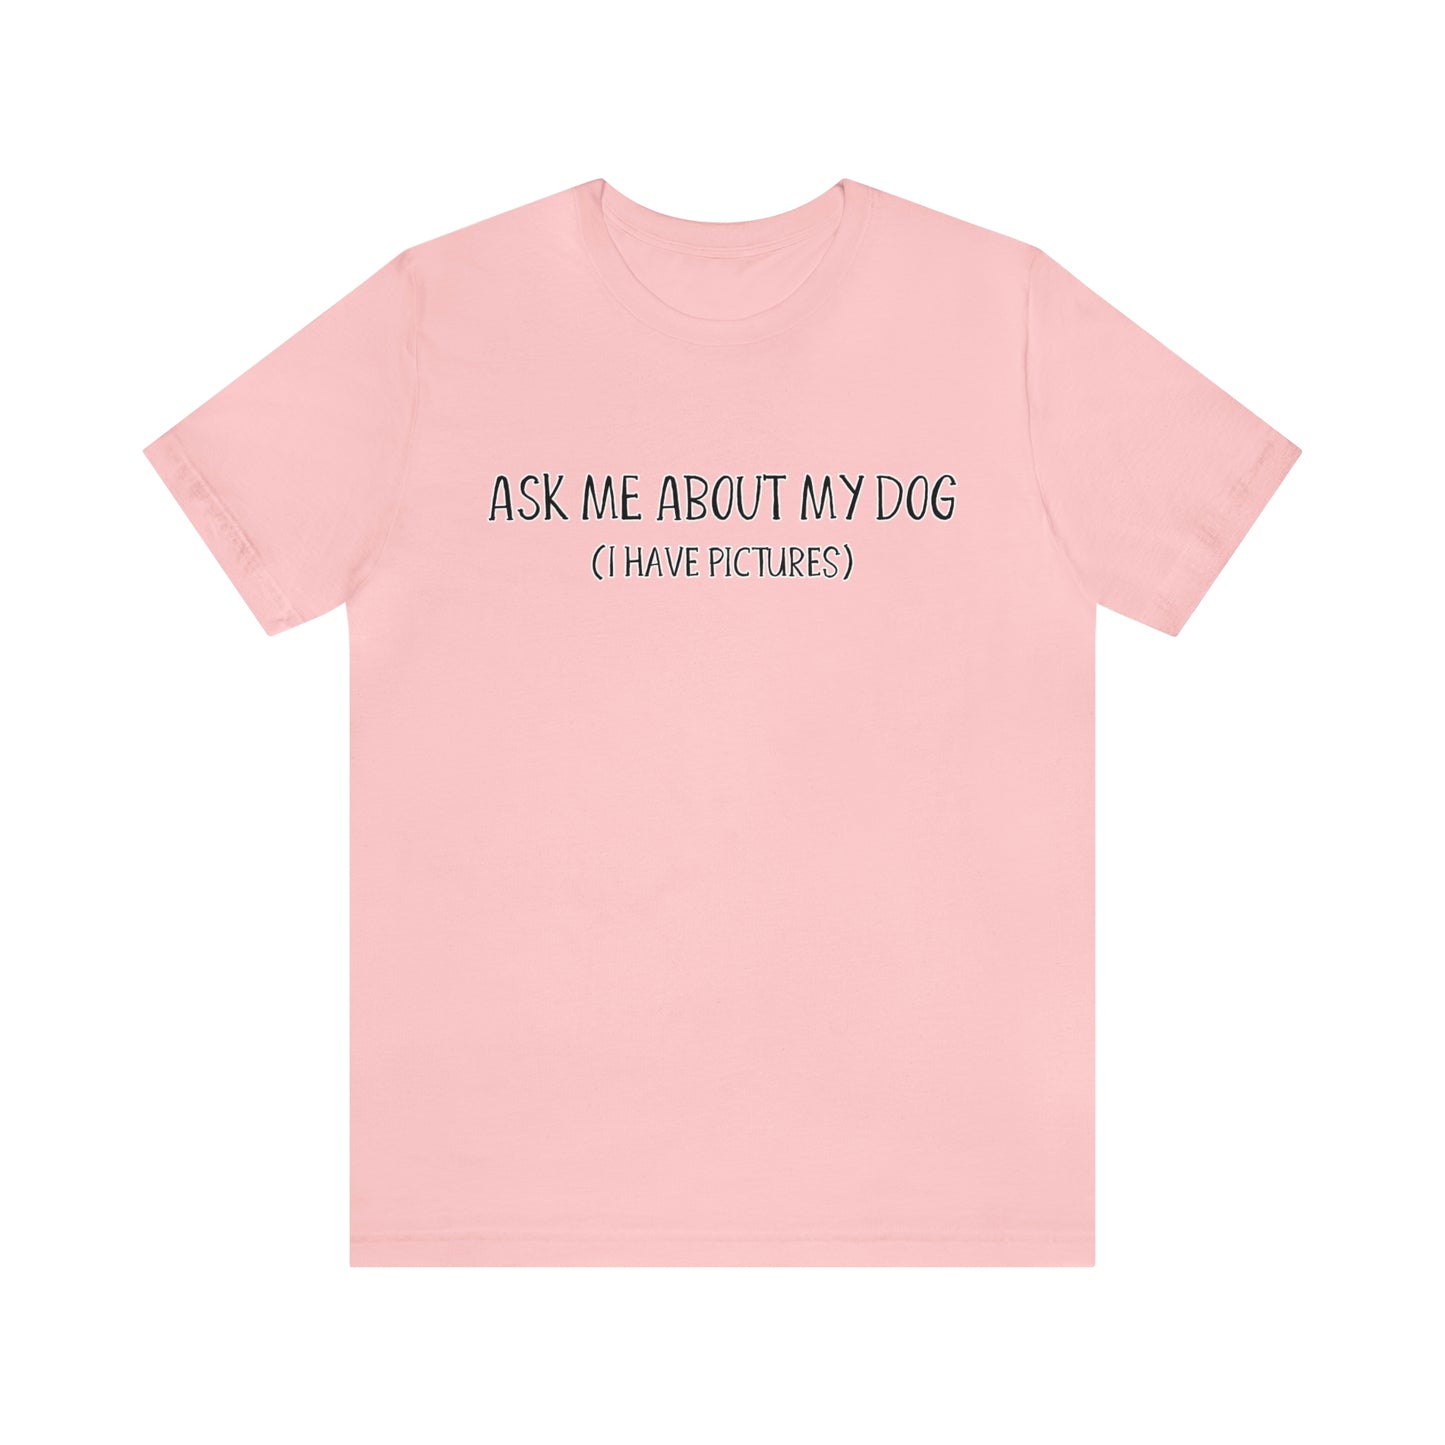 ask me about my dog t shirt pink